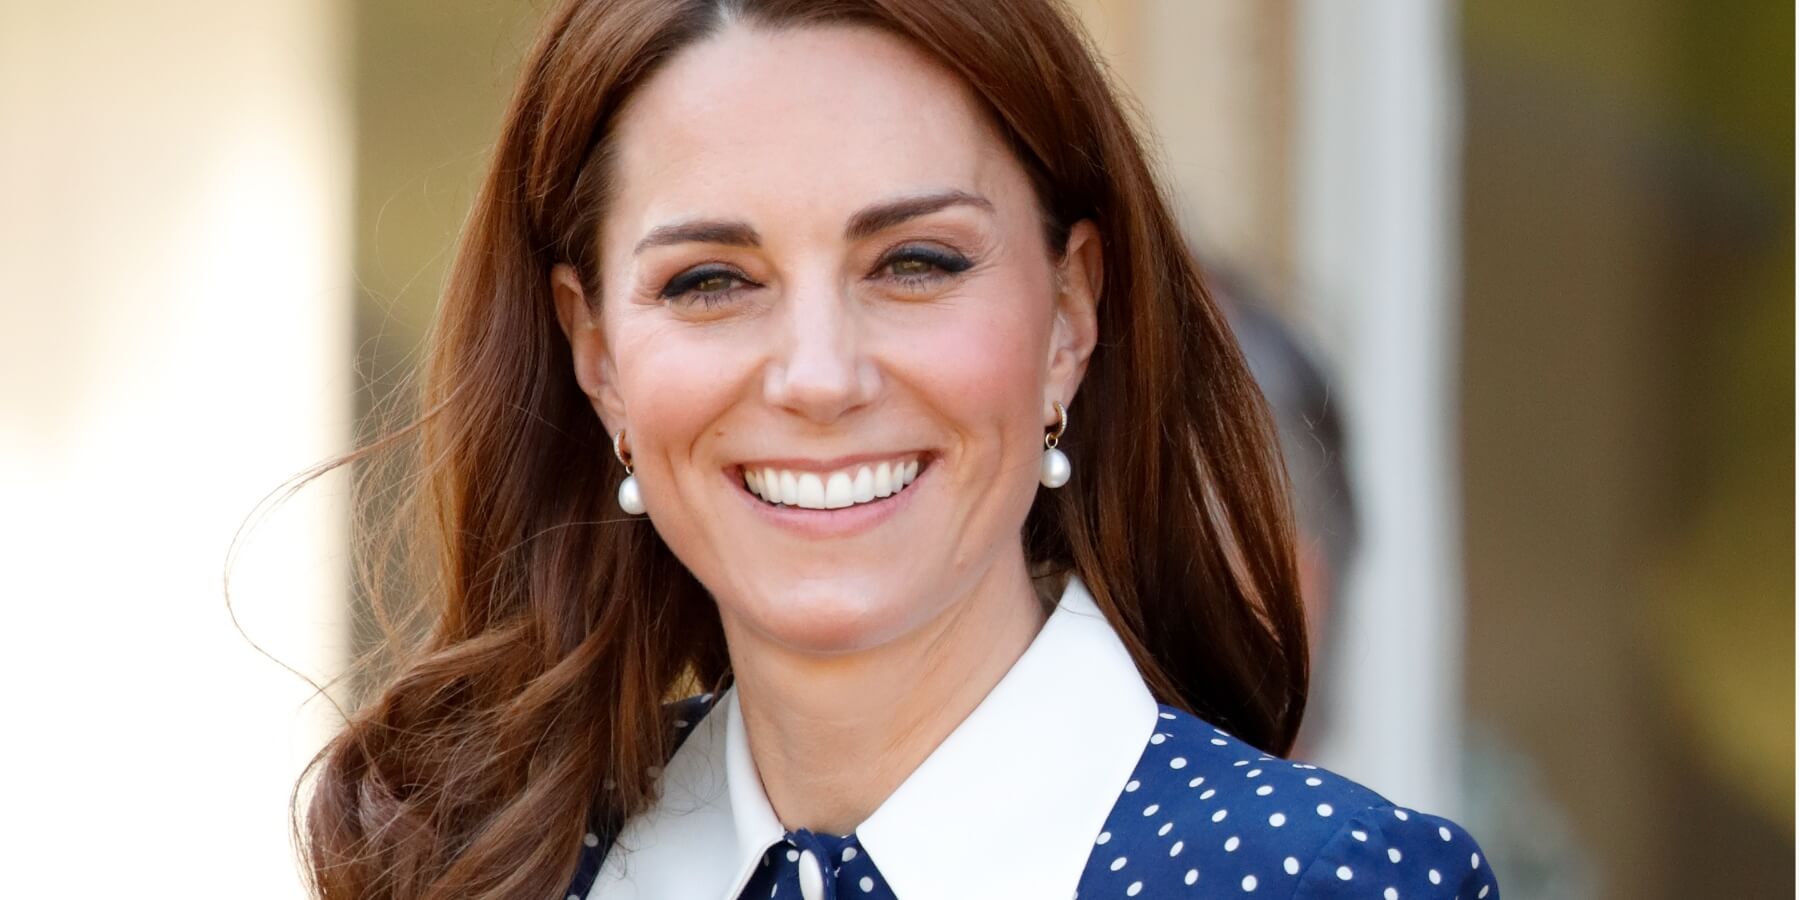 Kate Middleton may be on the receiving end of a billion dollar gift from King Charles called a royal warrant.